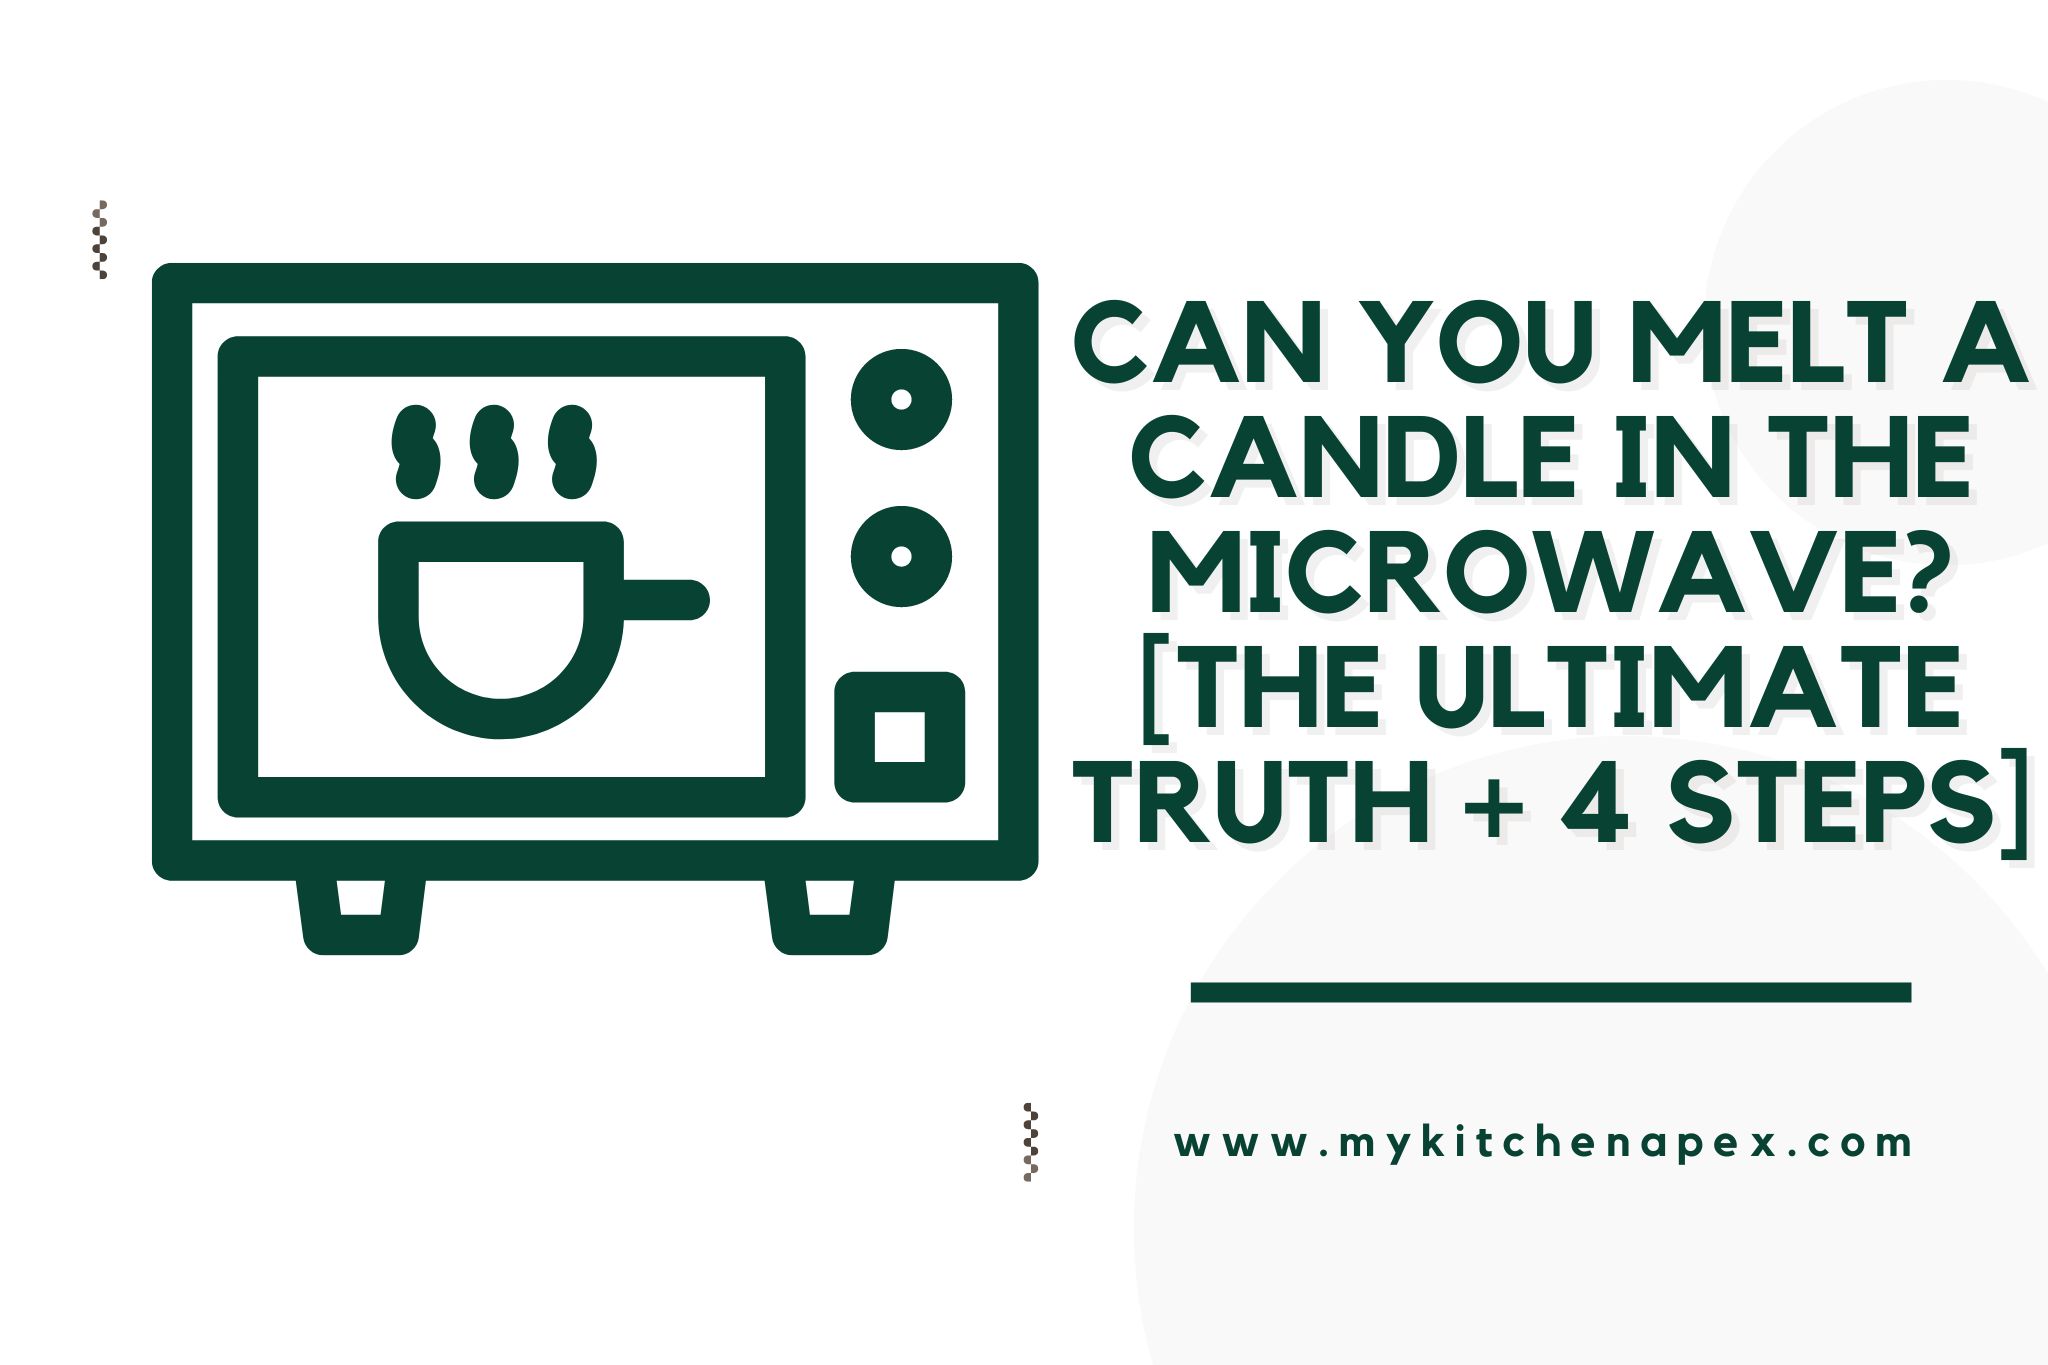 Can You Melt A Candle In The Microwave? [The ULTIMATE truth + 4 Steps]